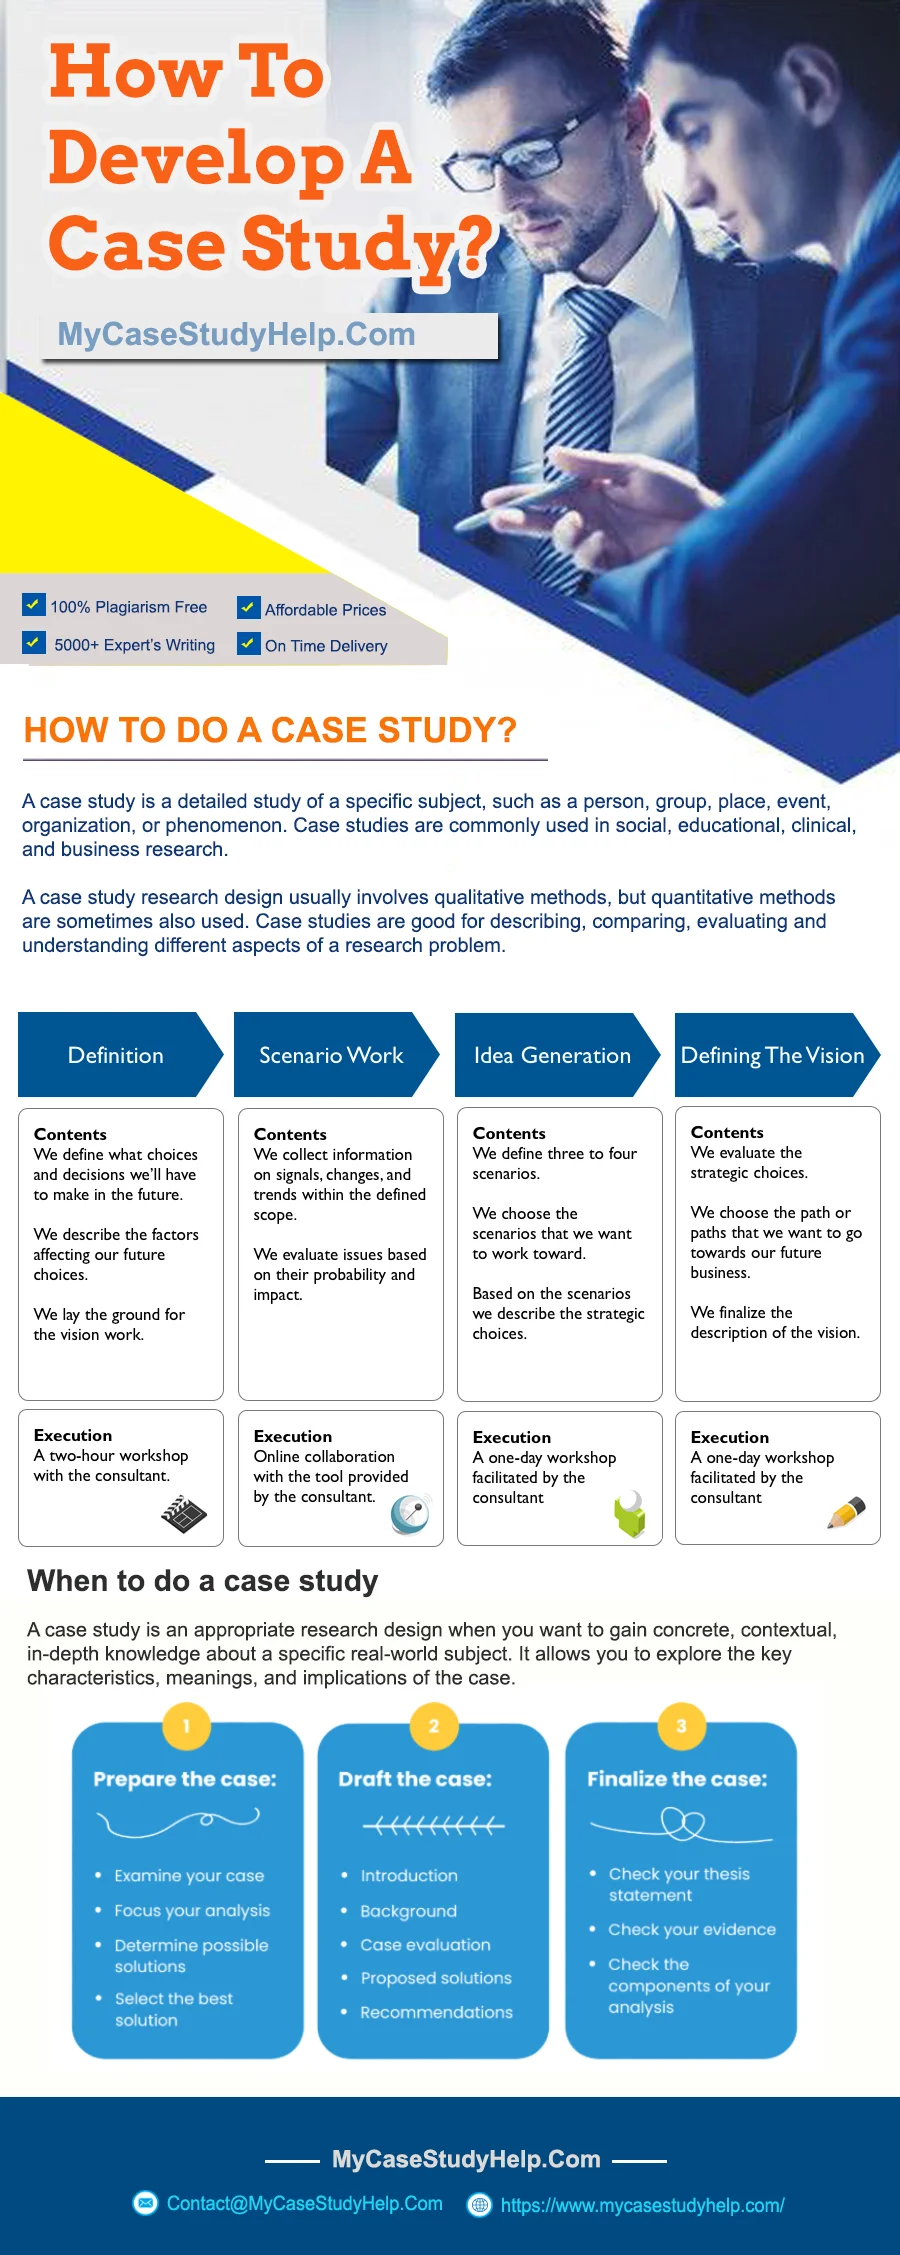 How To Develop A Case Study